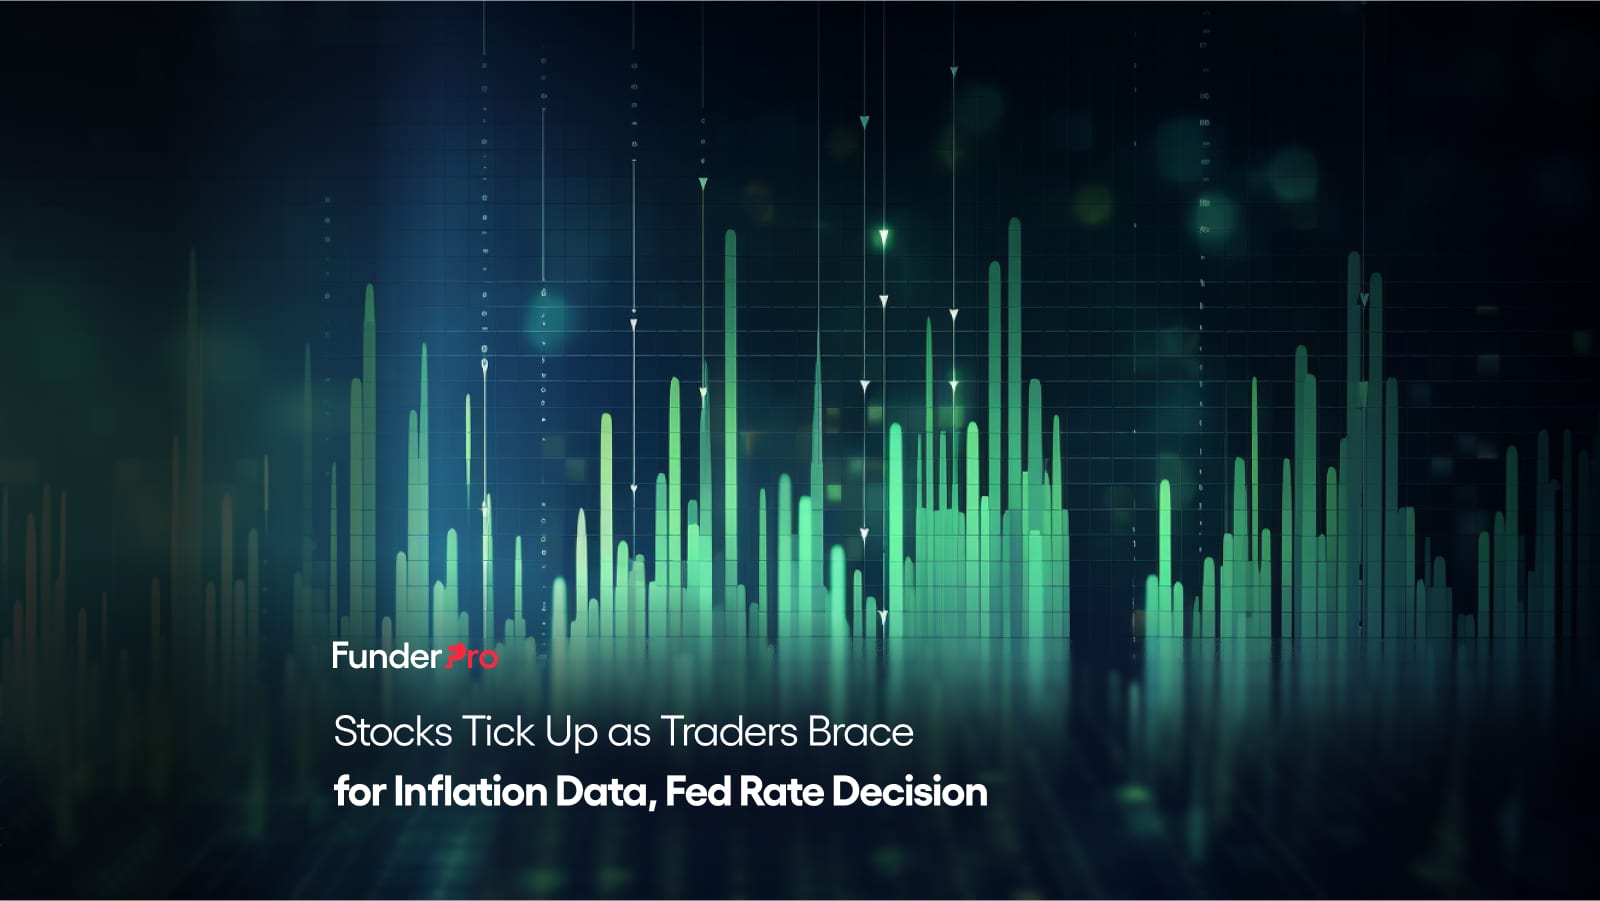 A stacked week of economic news is about to unfurl as markets eye a cooling inflation report and a rate pause by the Federal Reserve.